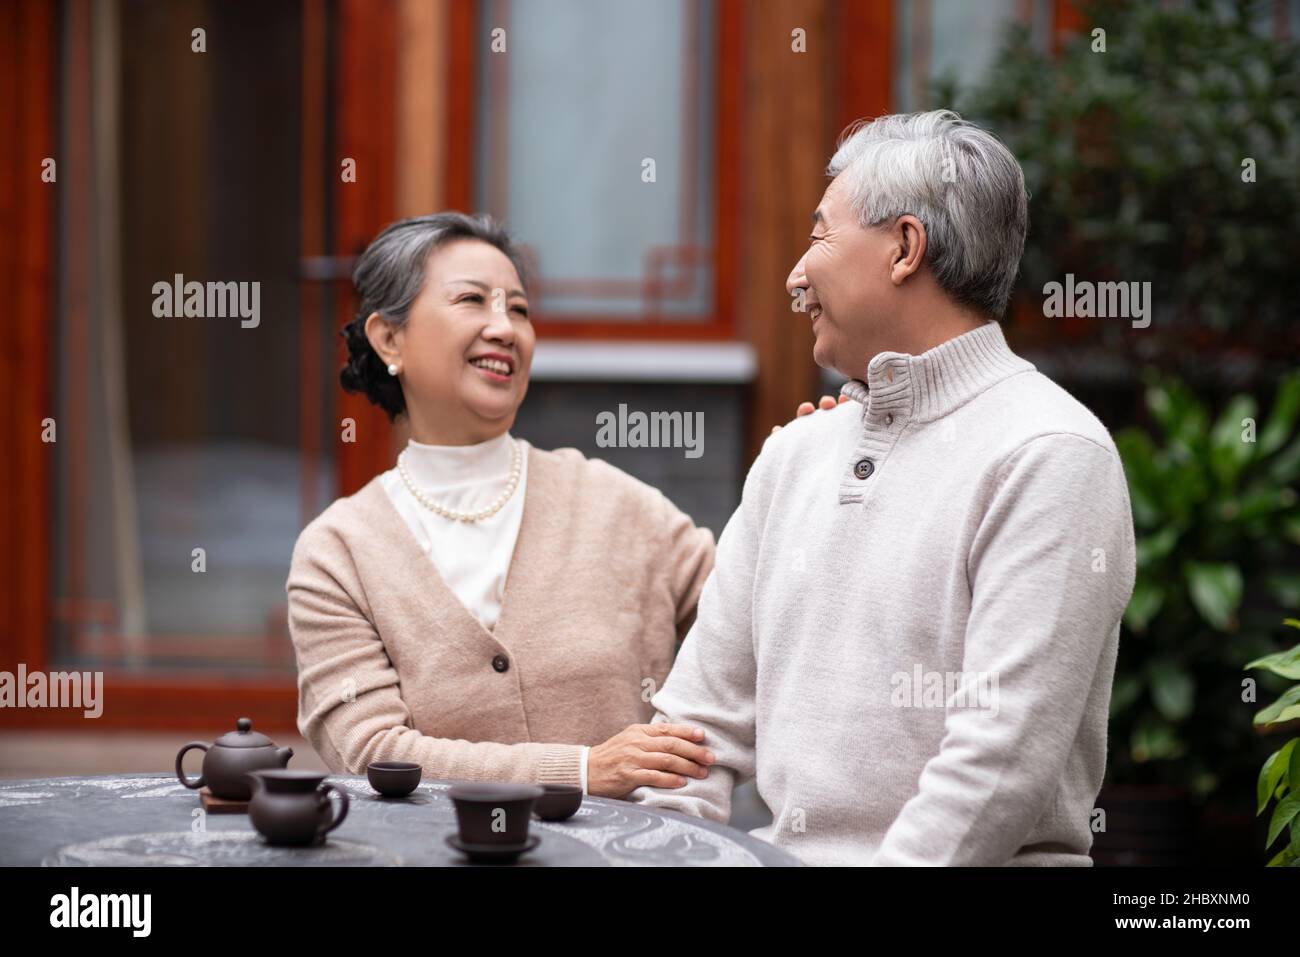 Old couple drinking tea and chatting in the courtyard Stock Photo